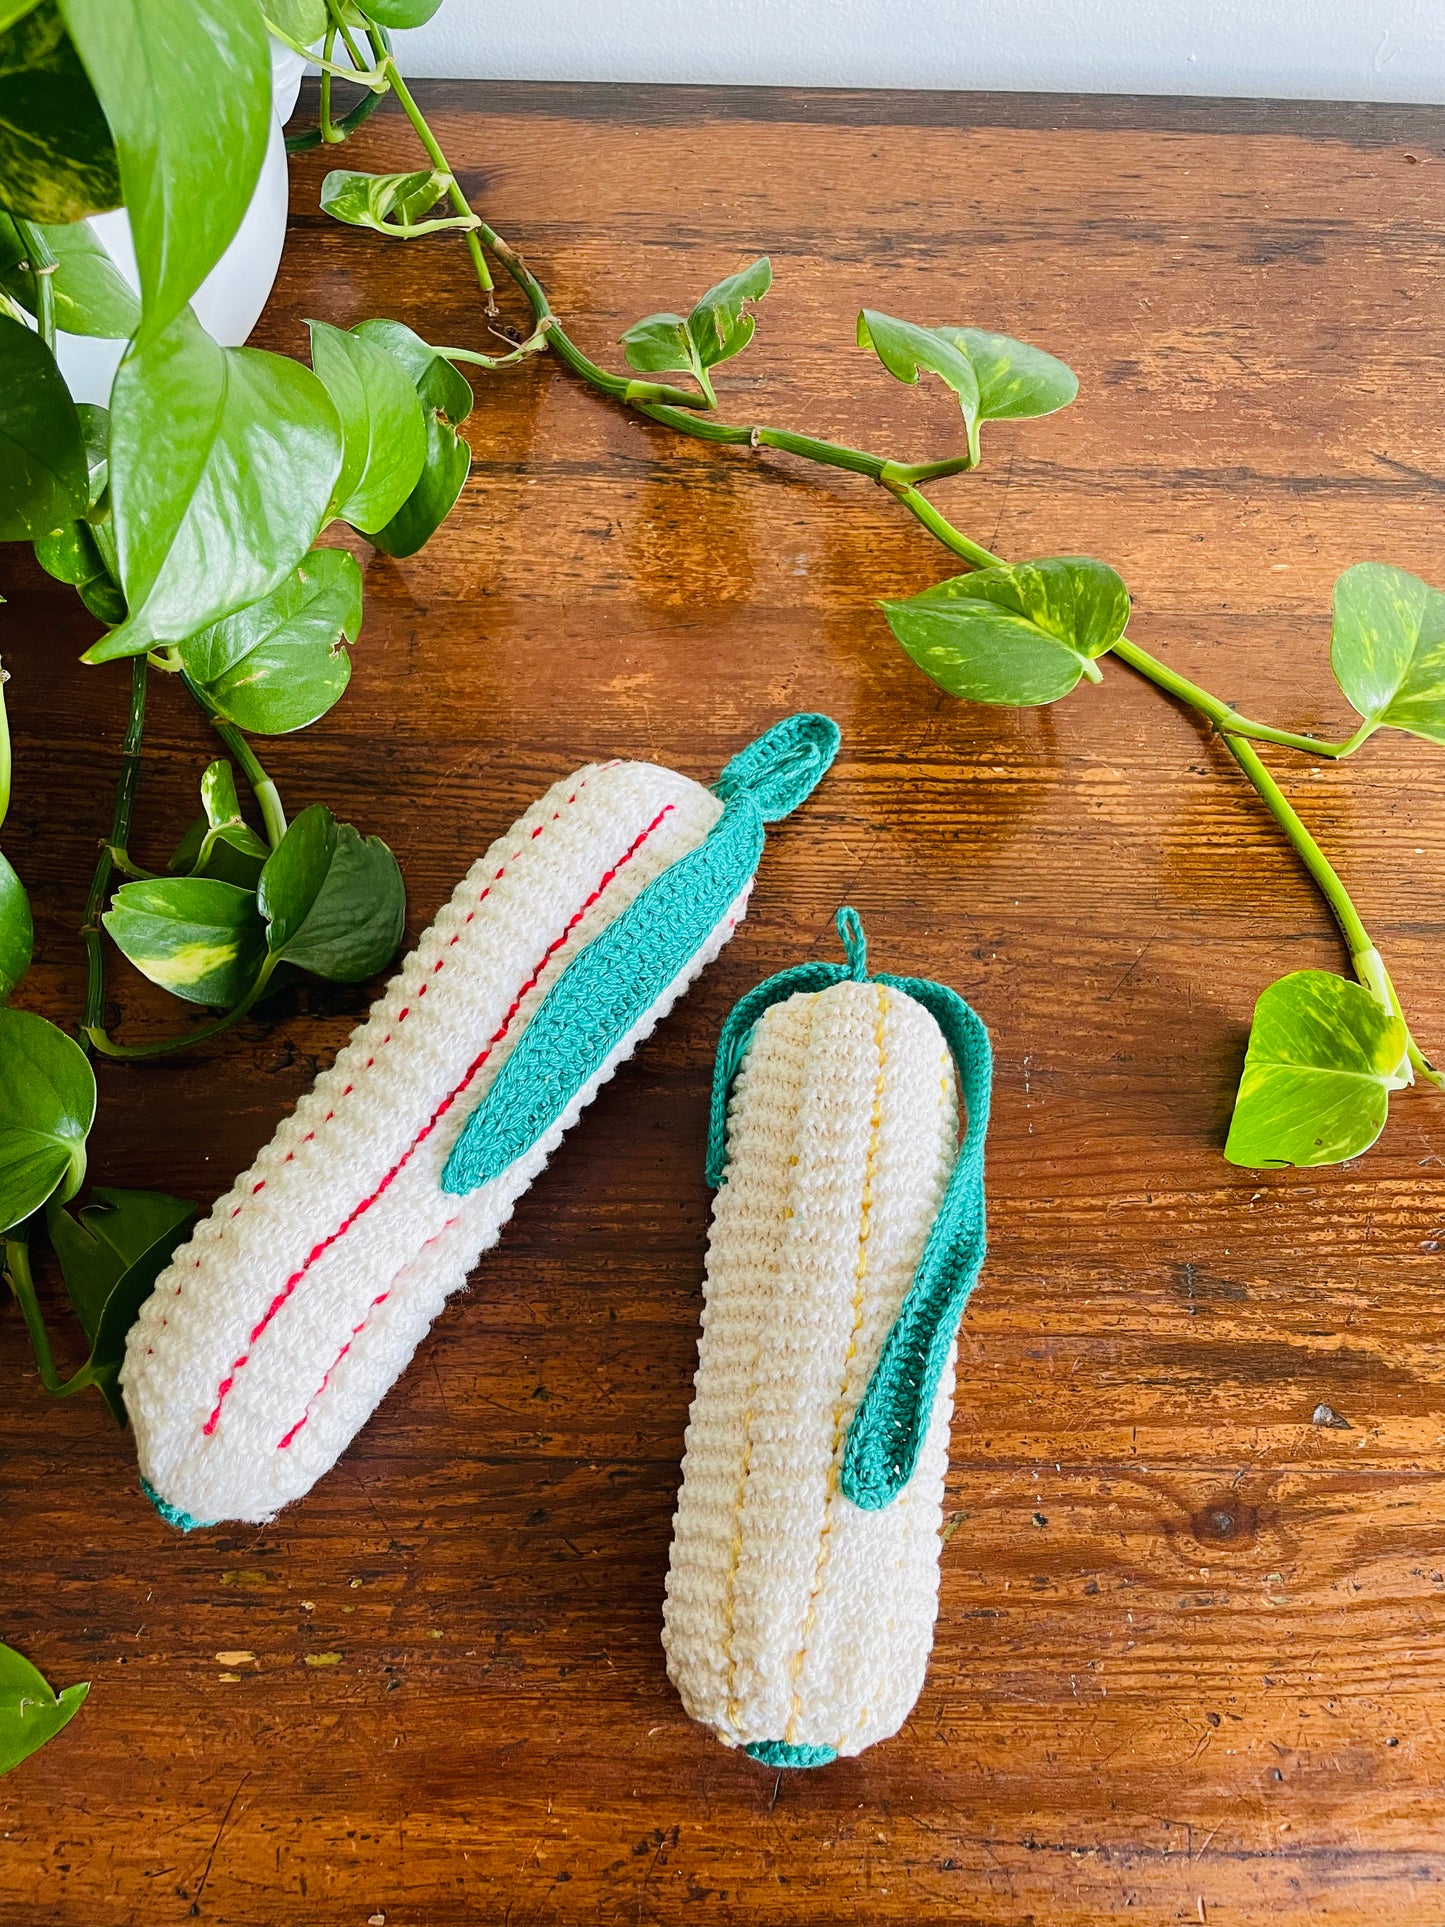 Handmade Crochet Vegetables - Decor or Toy - Great for a Play Kitchen - Set of 2